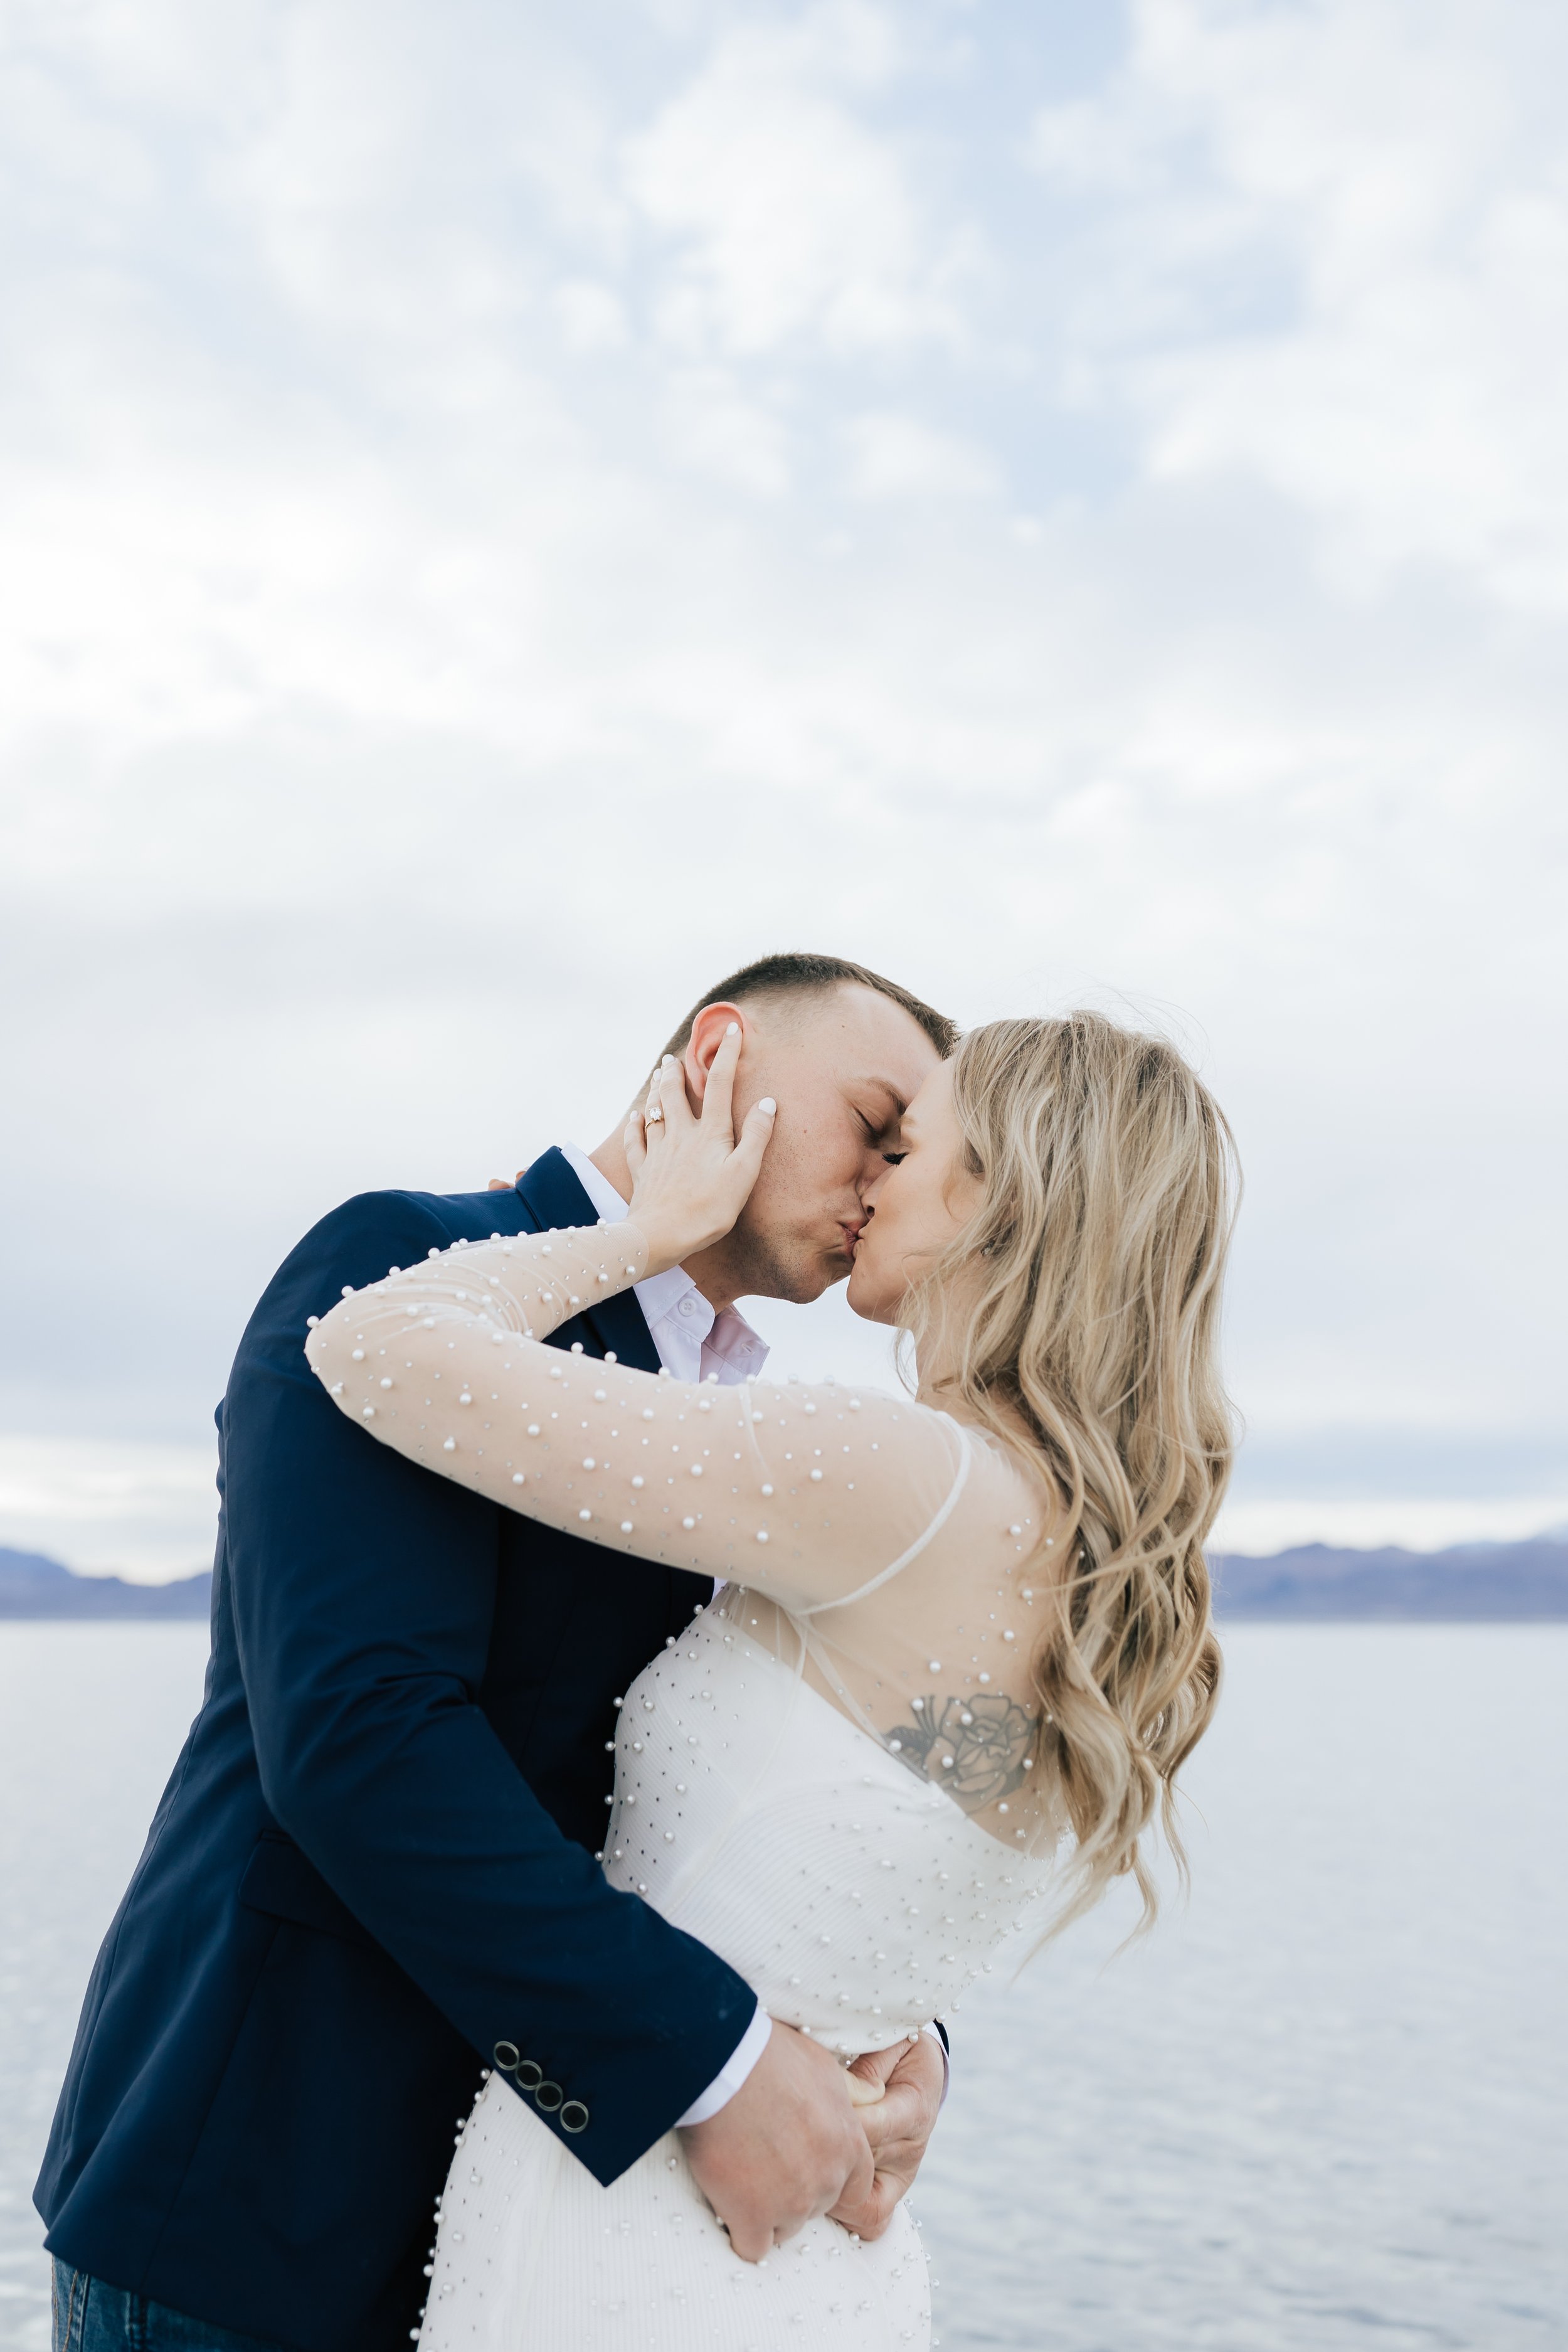  Monotone landscape backdrops for engagements in Utah with Emily Jenkins Photography at Bonneville Salt Flats. monotone photography backdrop Utah best engagement photography locations #EmilyJenkinsPhotography #EmilyJenkinsEngagements #BonnevilleSaltF